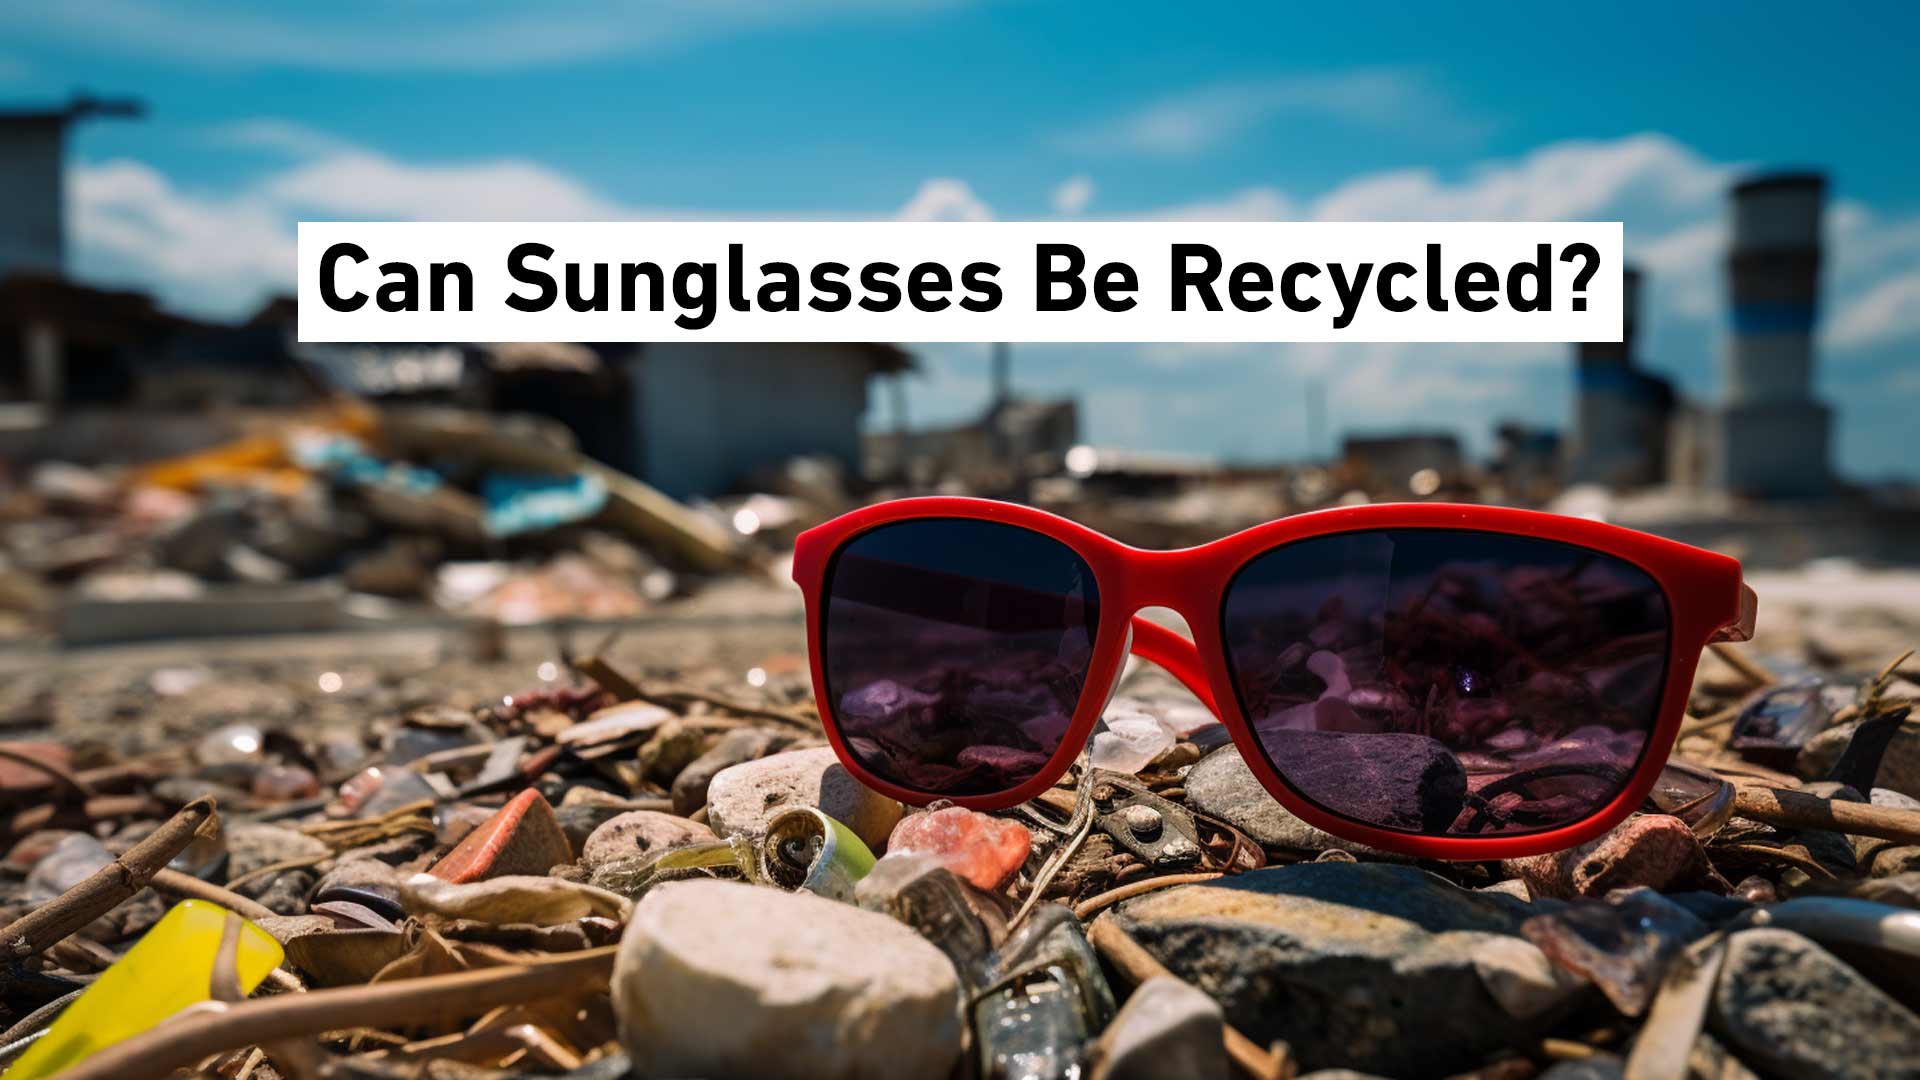 Can Sunglasses Be Recycled?